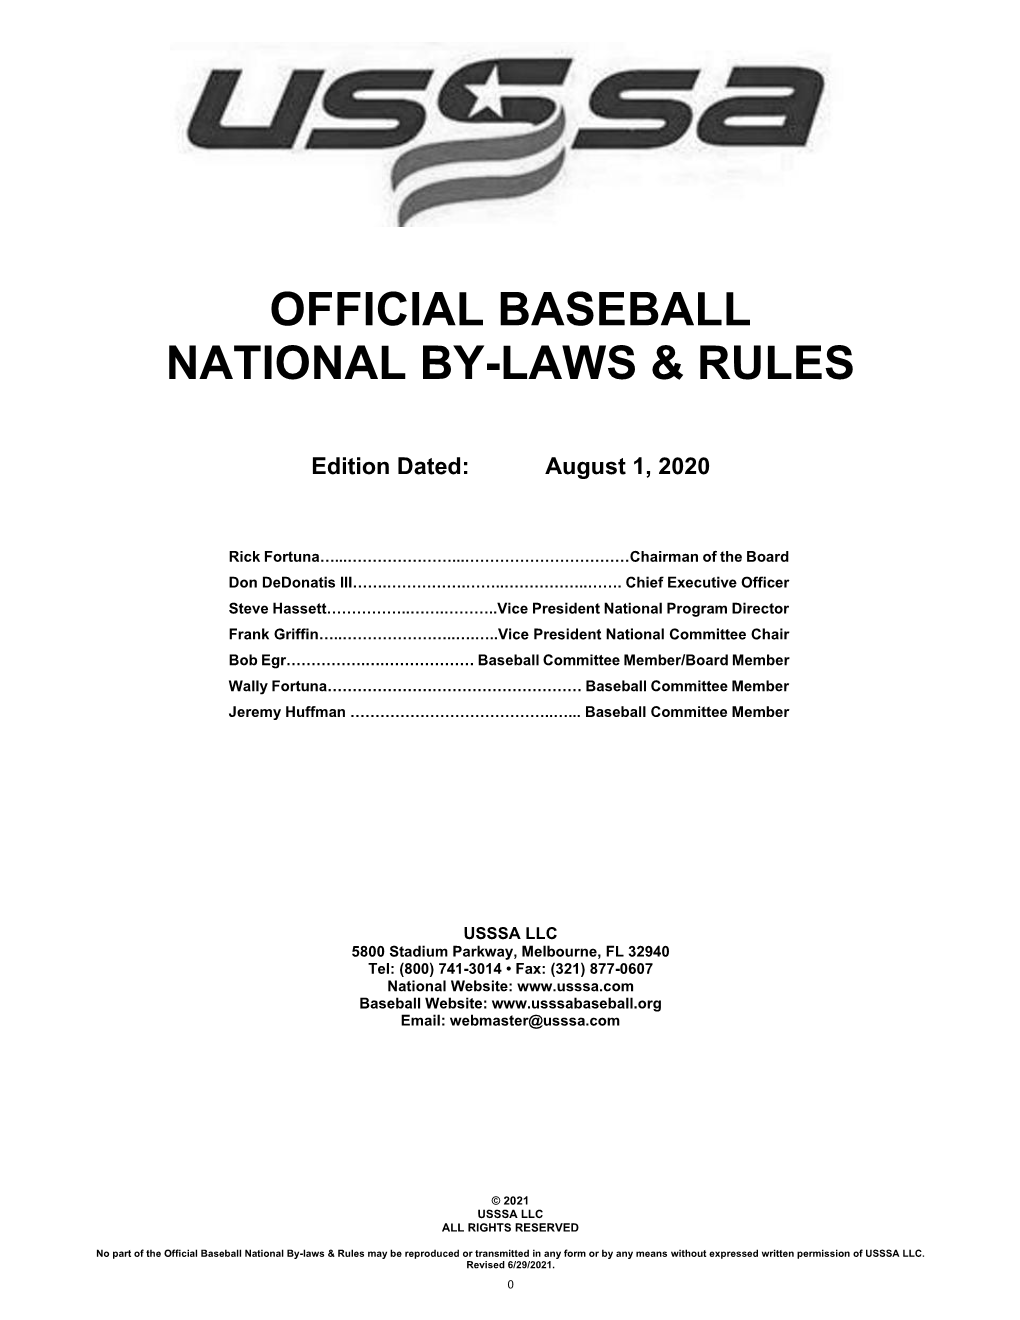 Official Baseball National By-Laws & Rules